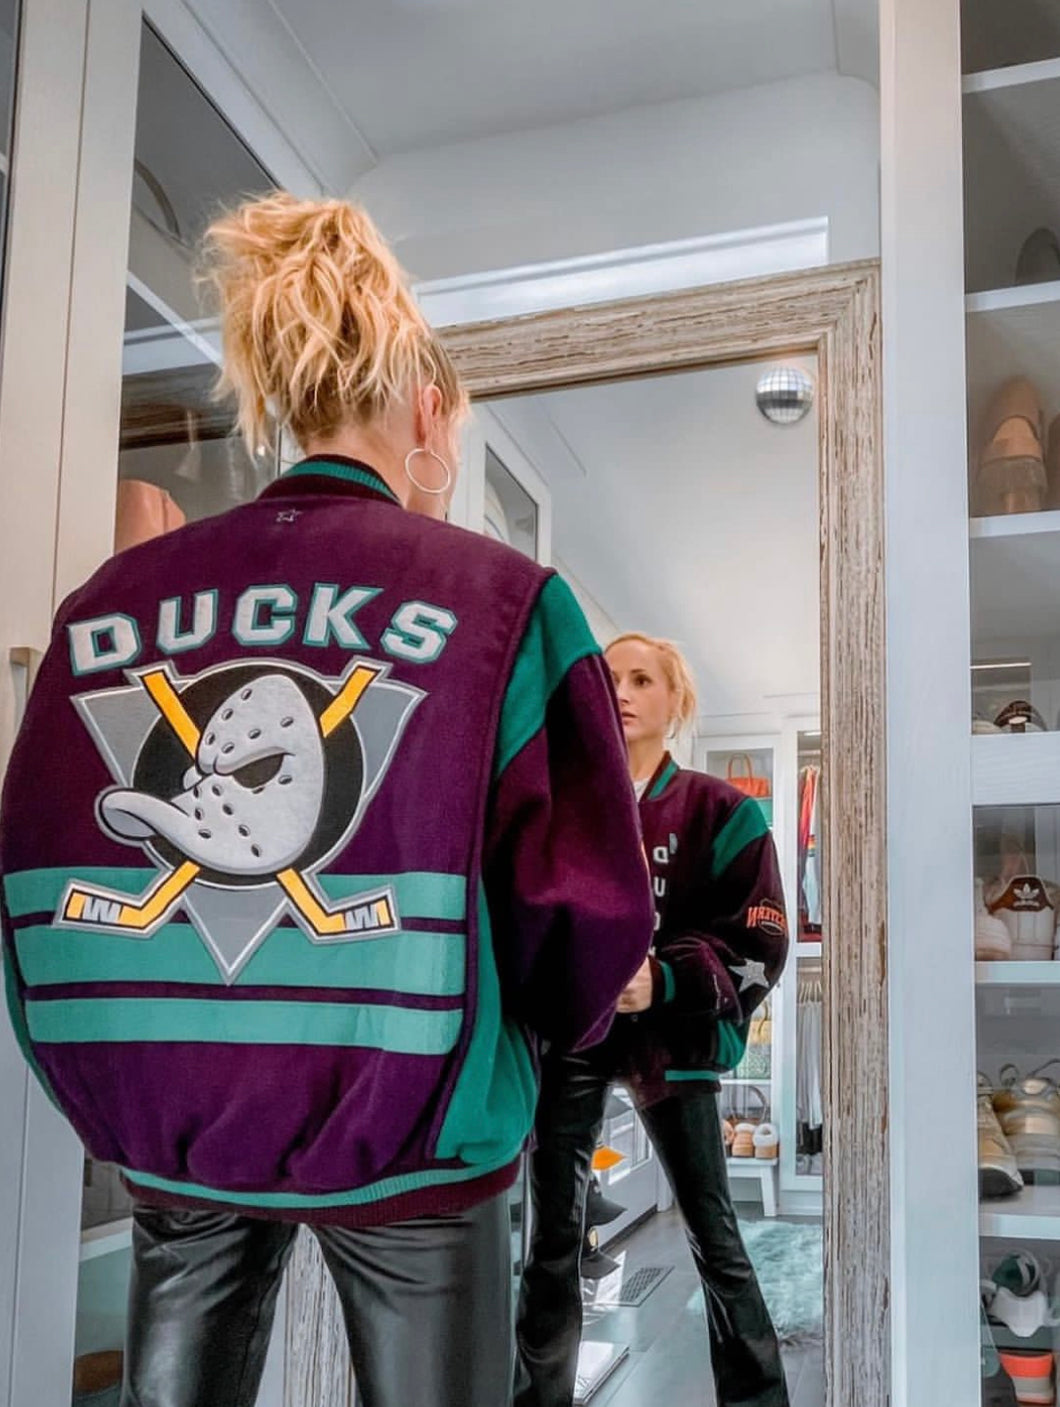 Anaheim Ducks, Mighty Duck NHL, “Rare Find” One of a Kind Vintage Letterman Jacket with Crystal Star